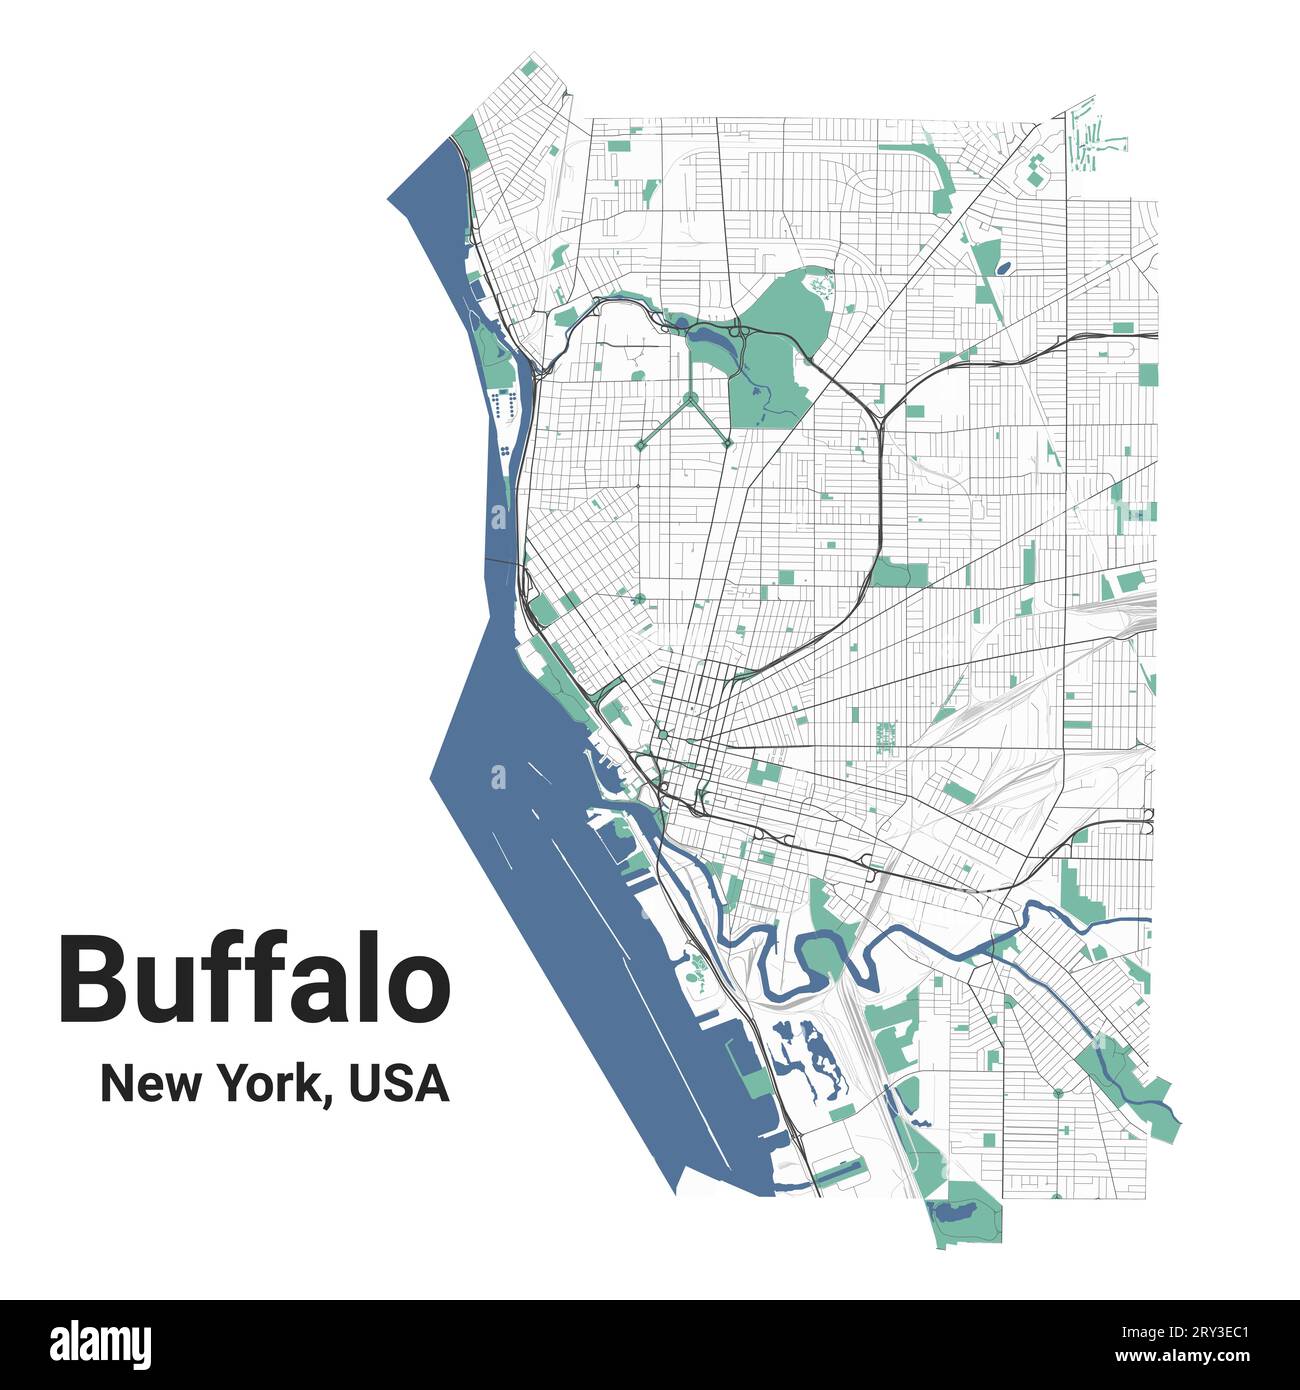 Buffalo map, New York, American city. Municipal administrative area map with rivers and roads, parks and railways. Vector illustration. Stock Vector